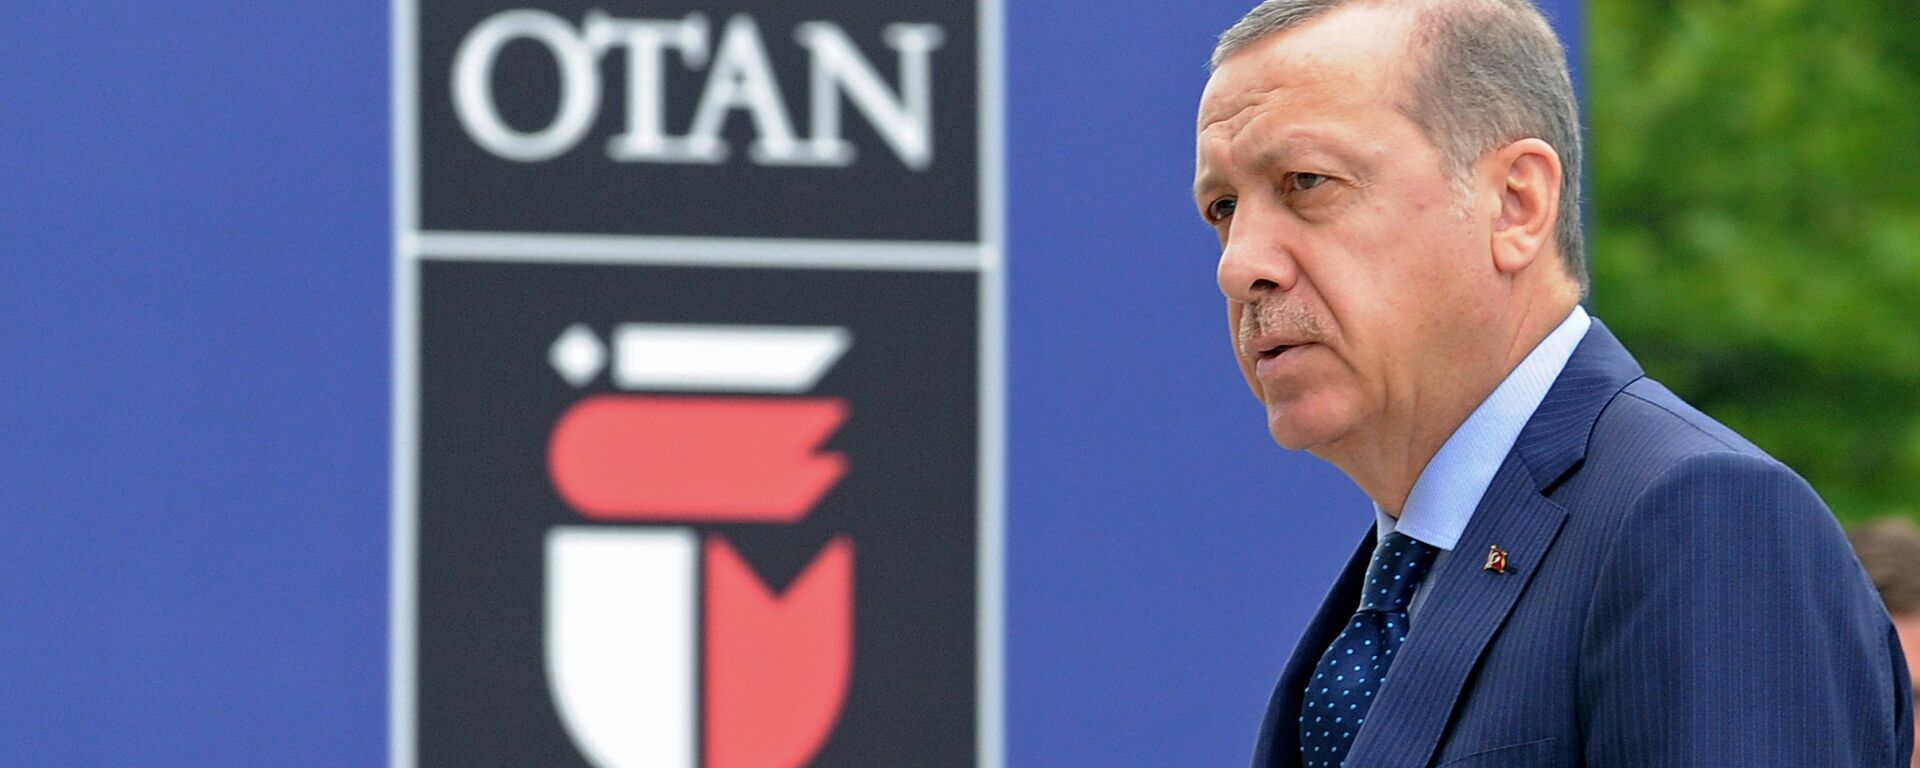 Turkey's President Recep Tayyip Erdogan arrives for sessions on the second day of the NATO Summit in Warsaw, Poland. (File) - Sputnik International, 1920, 13.05.2022